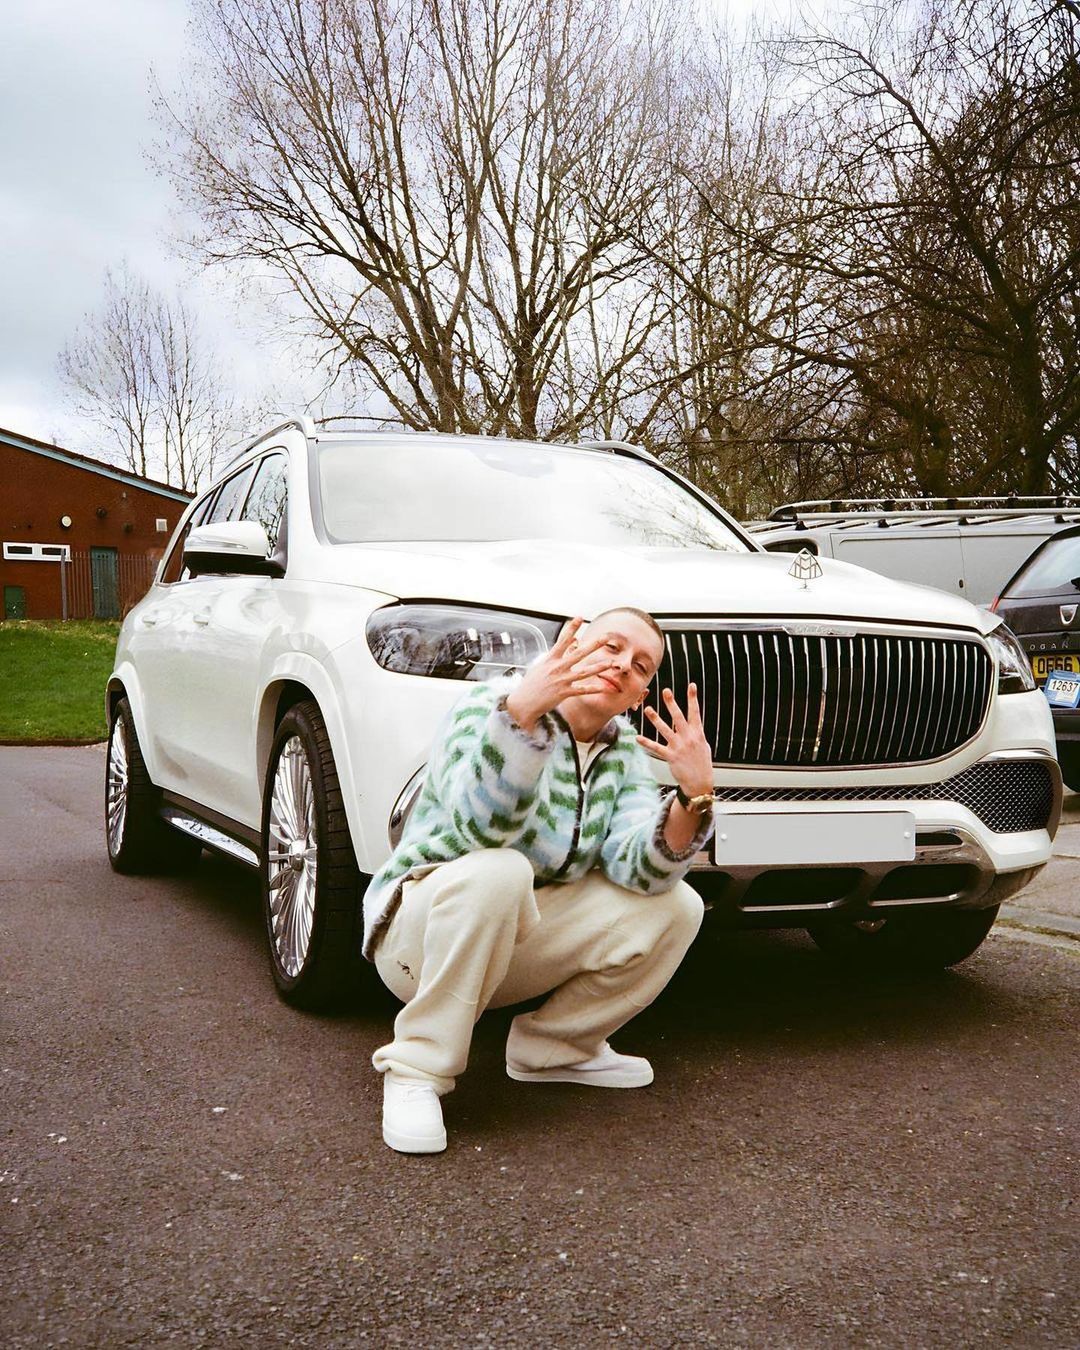 Aitch posing with his luxury Mercedes Maybach car before the attempted break-in.